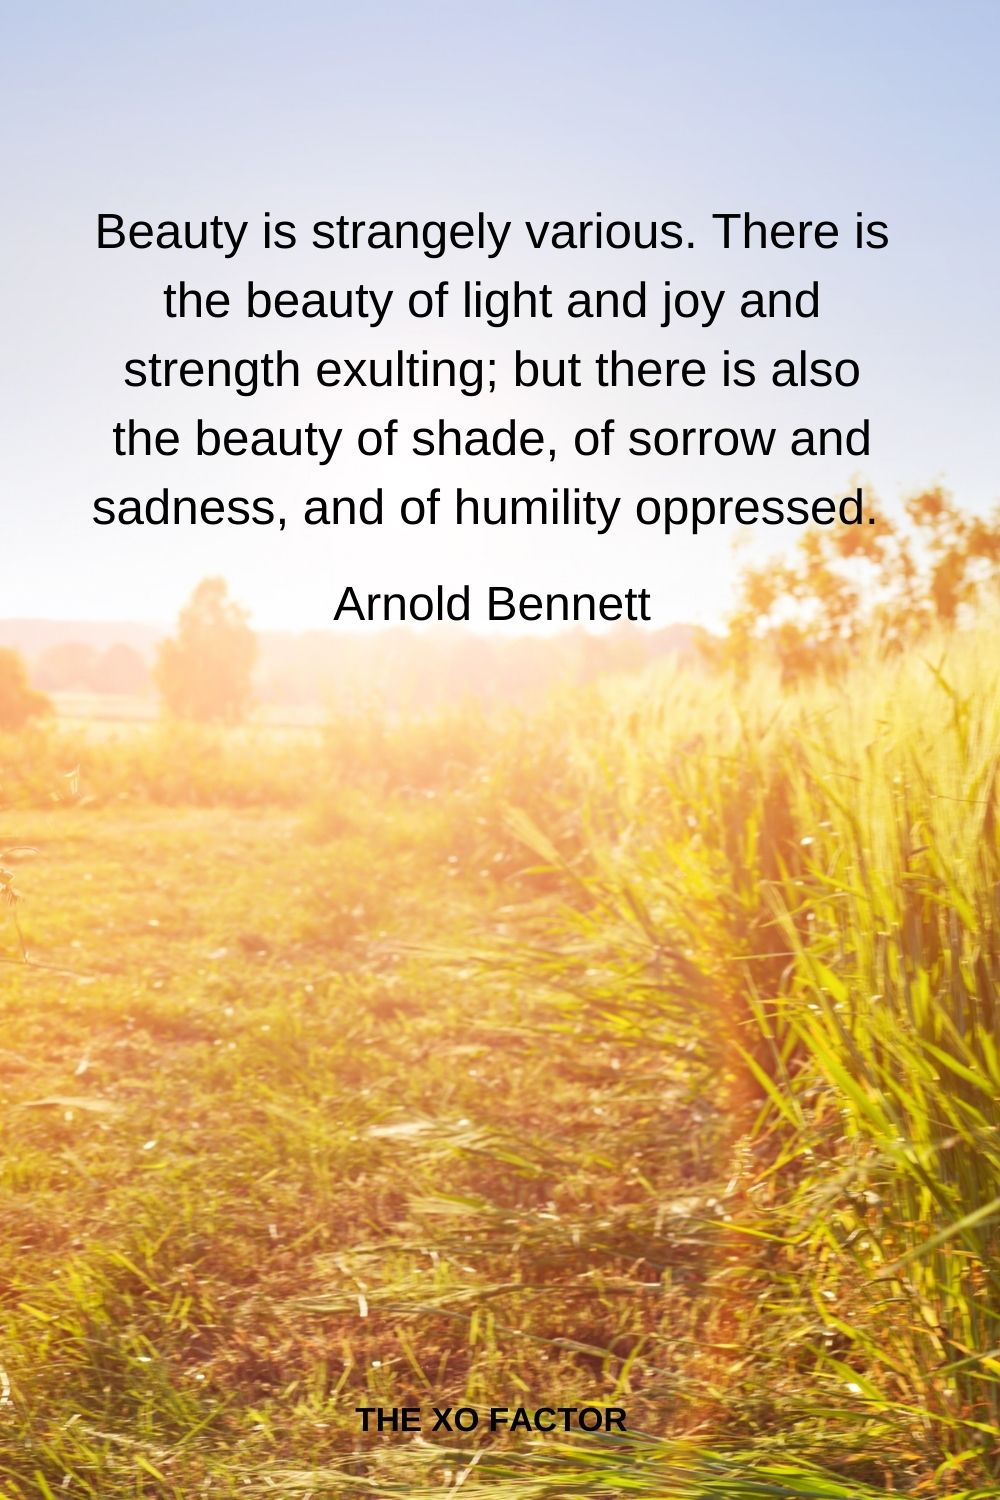 Beauty is strangely various. There is the beauty of light and joy and strength exulting; but there is also the beauty of shade, of sorrow and sadness, and of humility oppressed.  Arnold Bennett